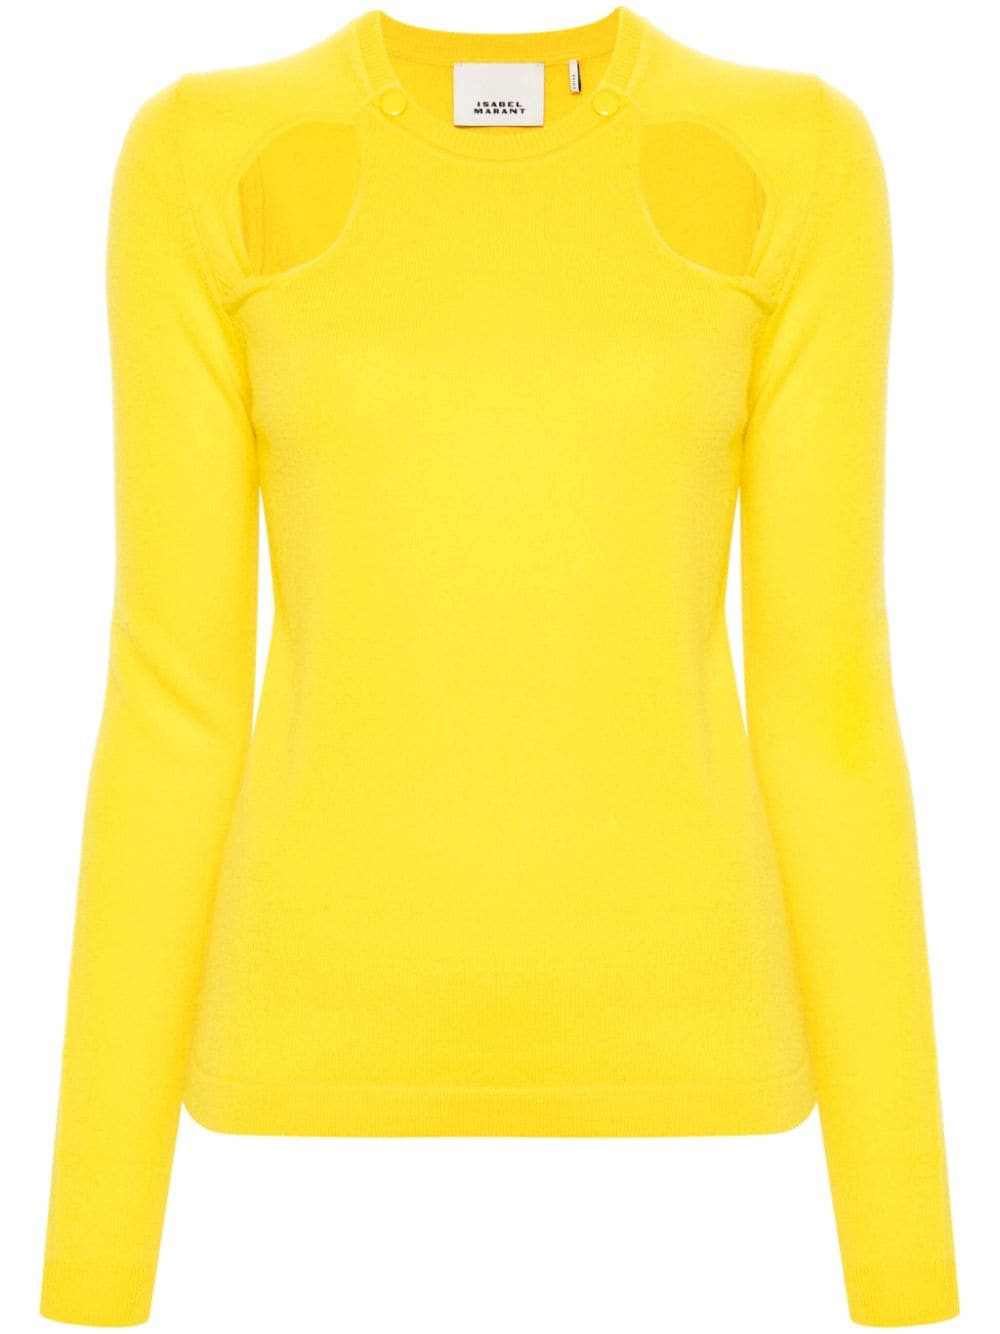 ISABEL MARANT cut-out cashmere top - Giallo